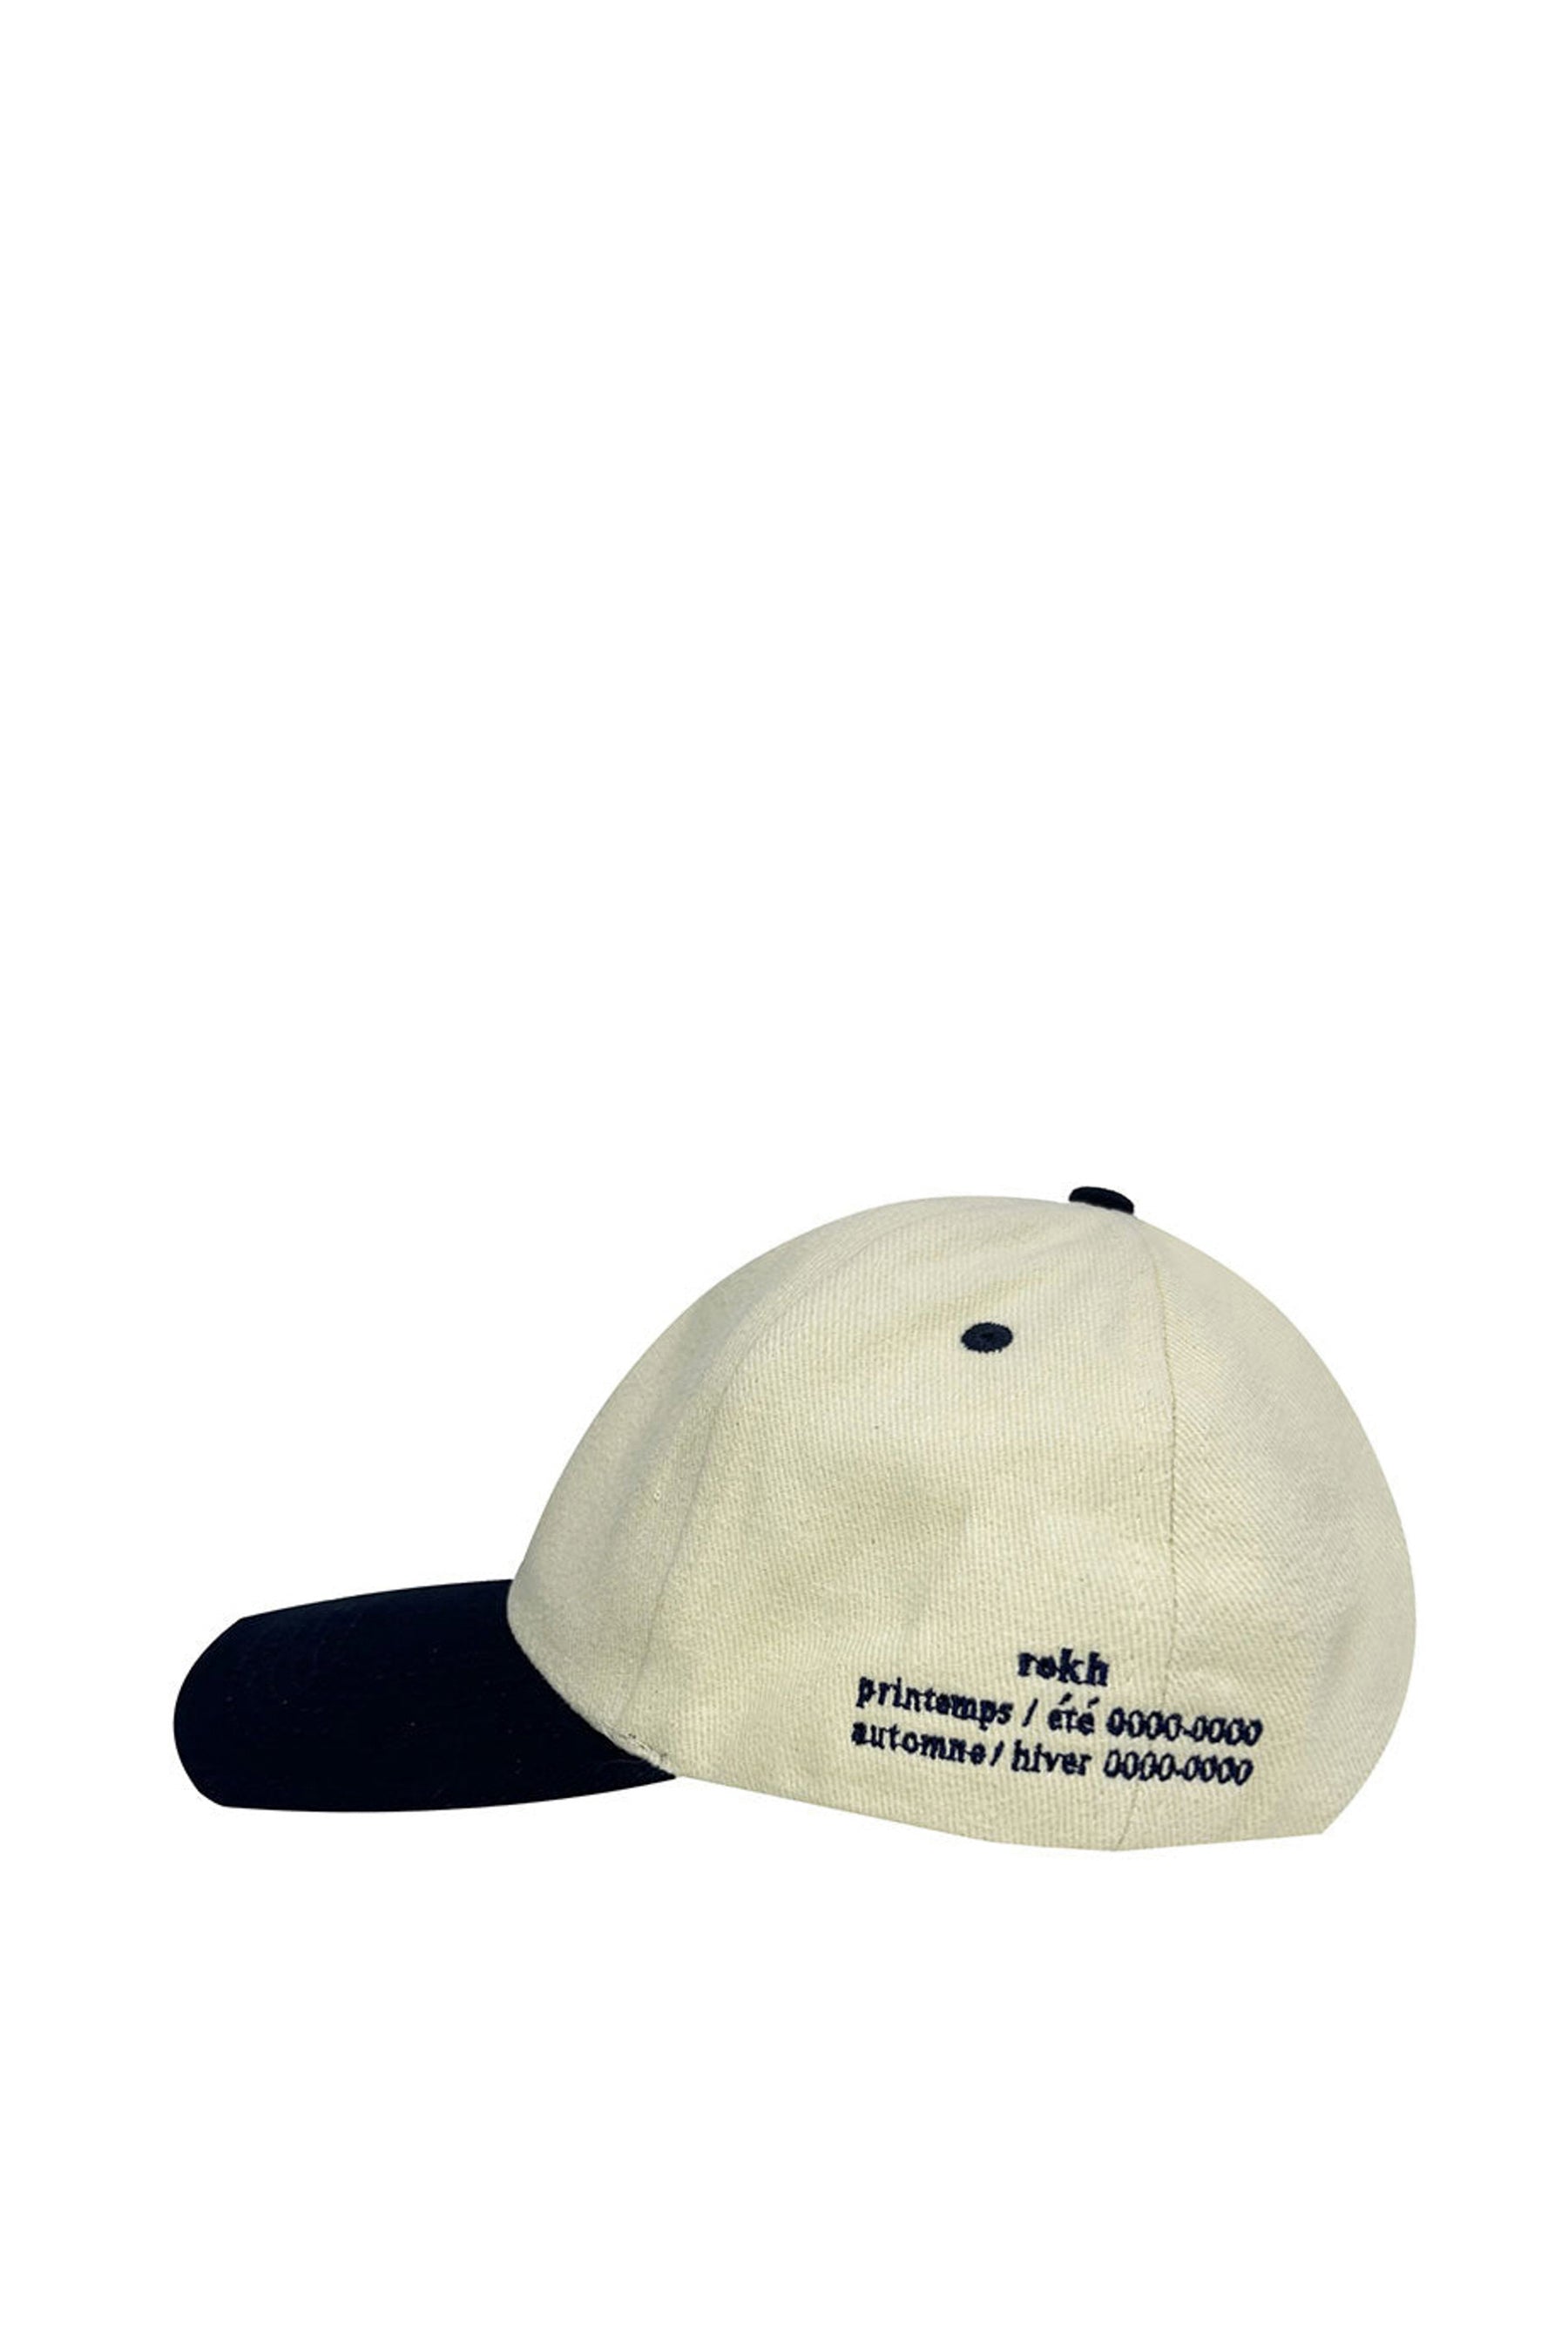 EMBROIDERED BALL CAP - IVORY NAVY / NVY